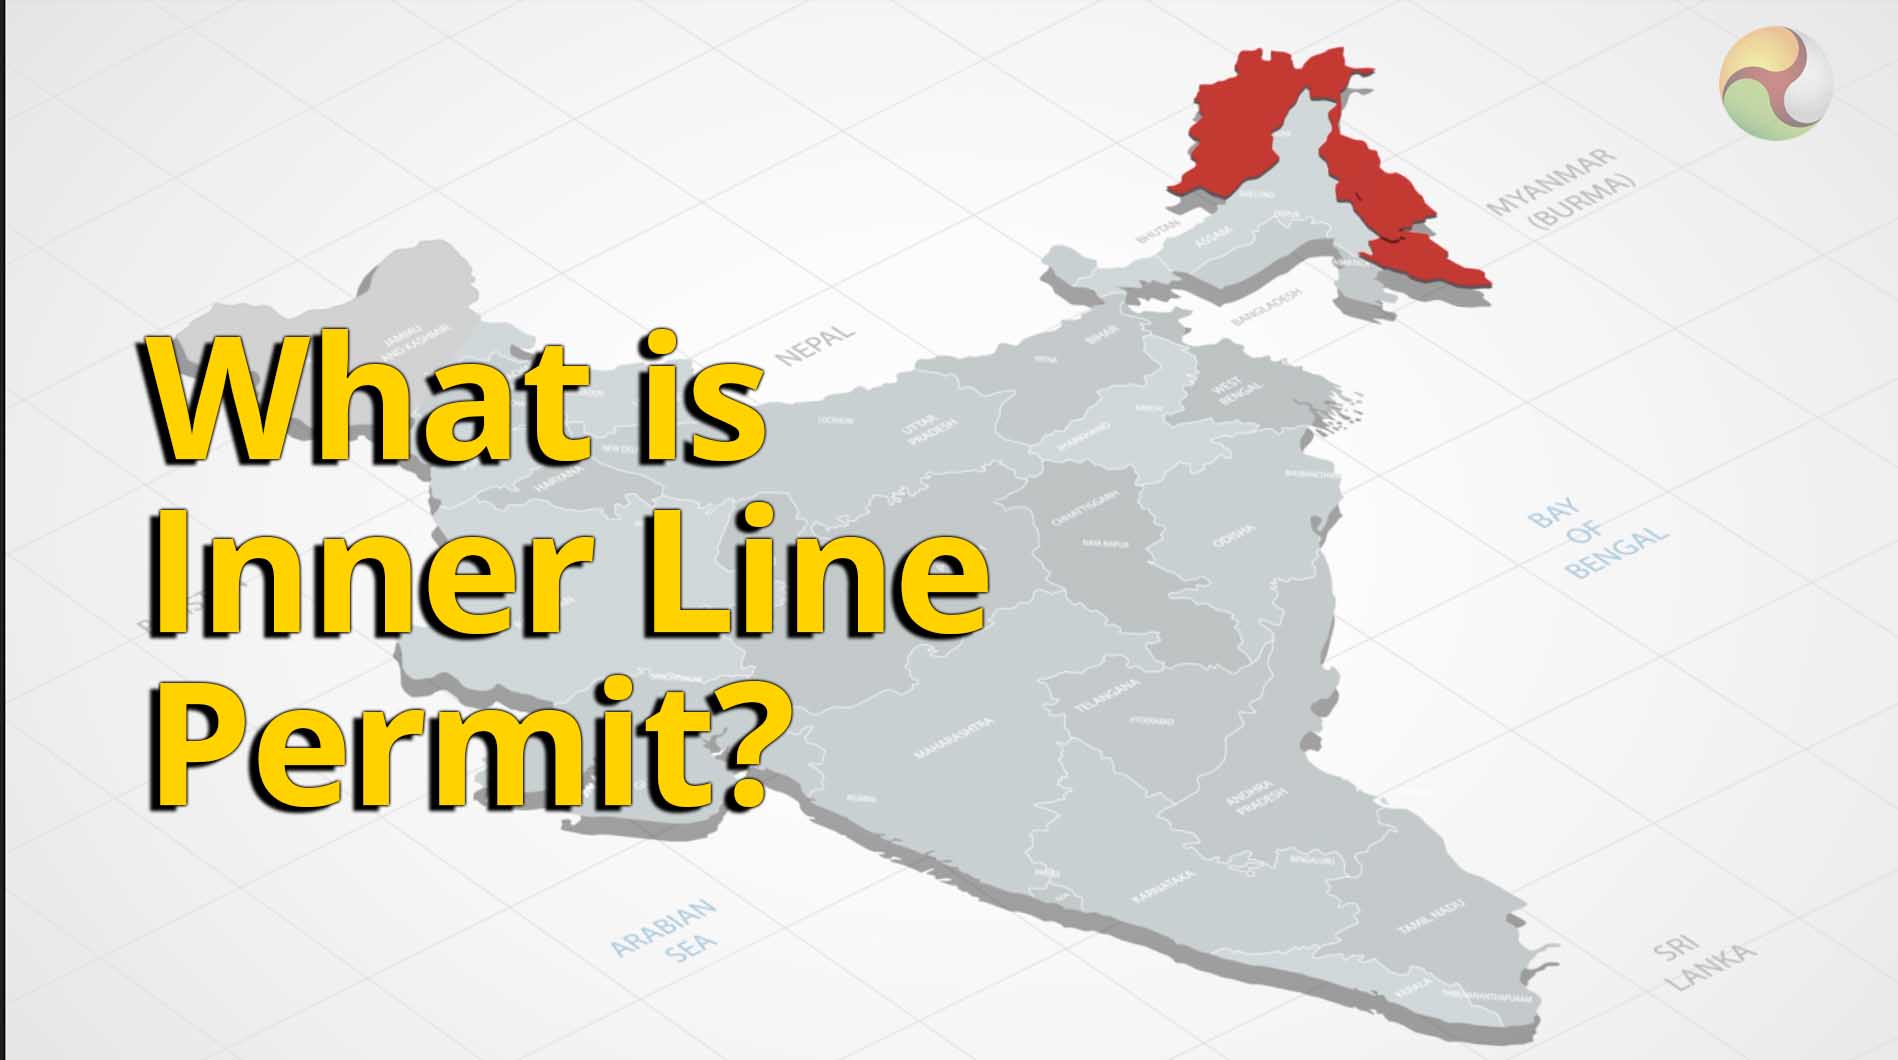 What is Inner Line Permit?